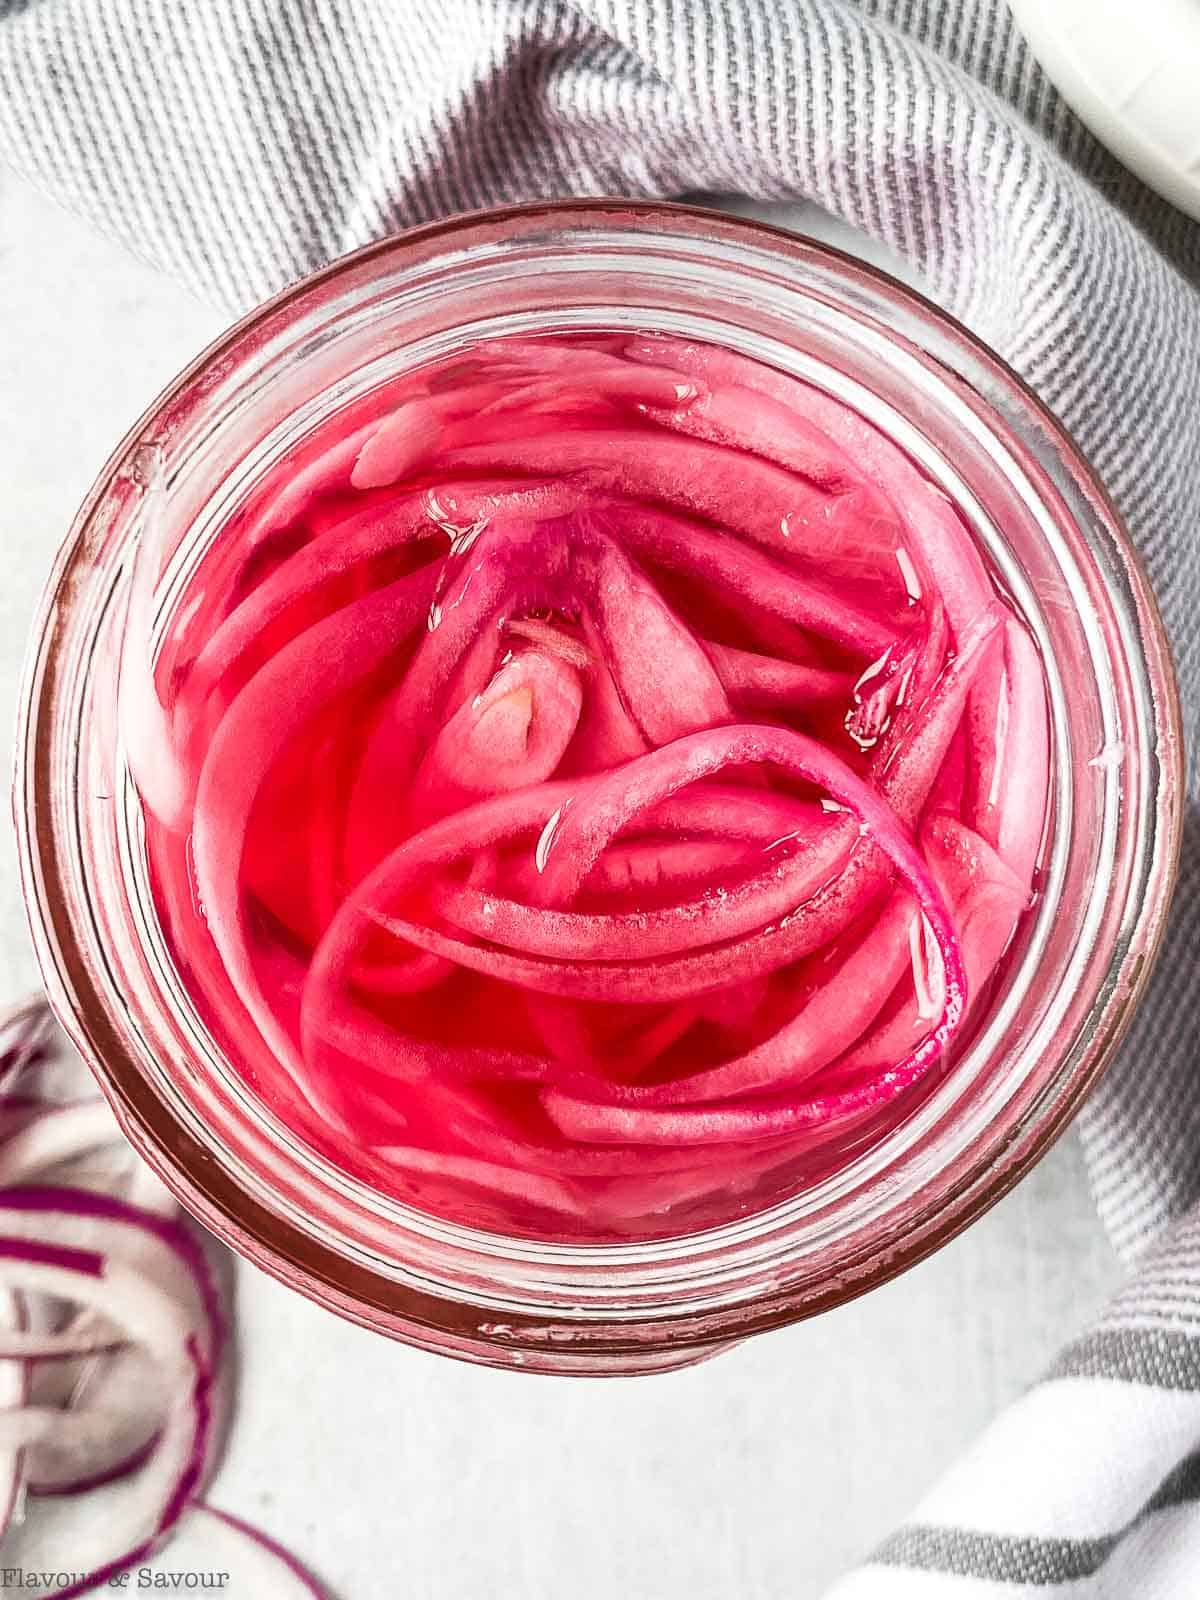 Overhead view of a jar of refrigerator pickled red onions